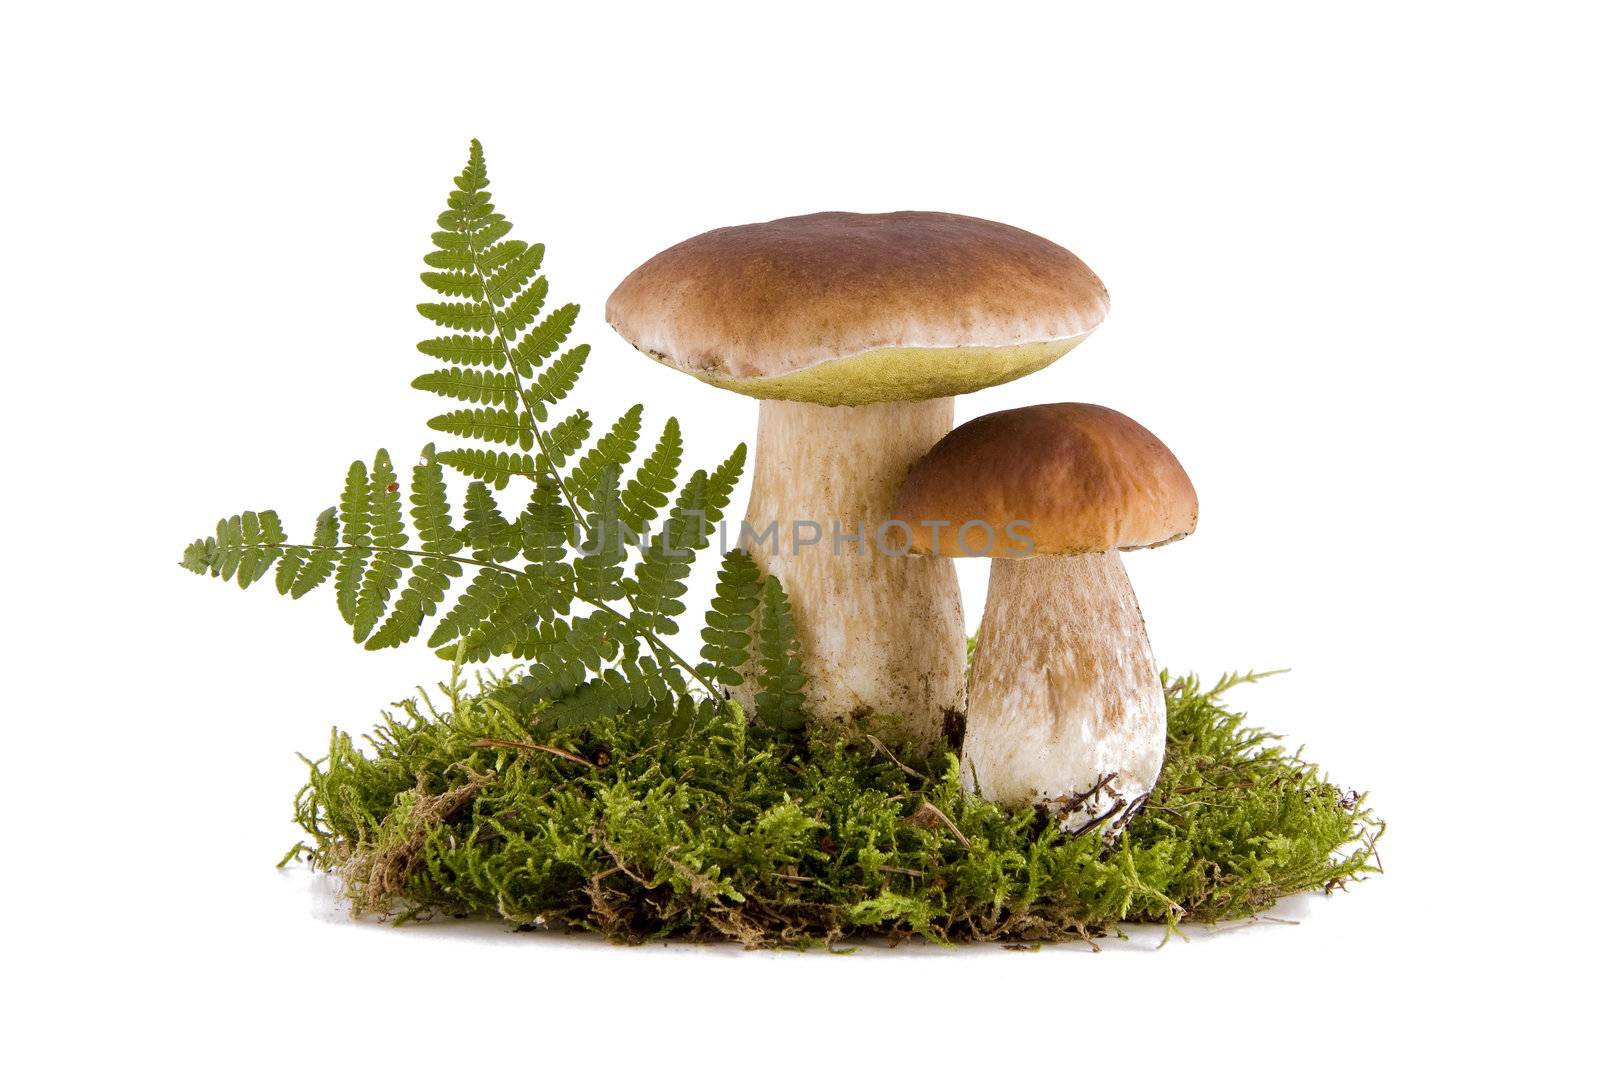 Two fresh porcini mushrooms in a green moss isolated on white background